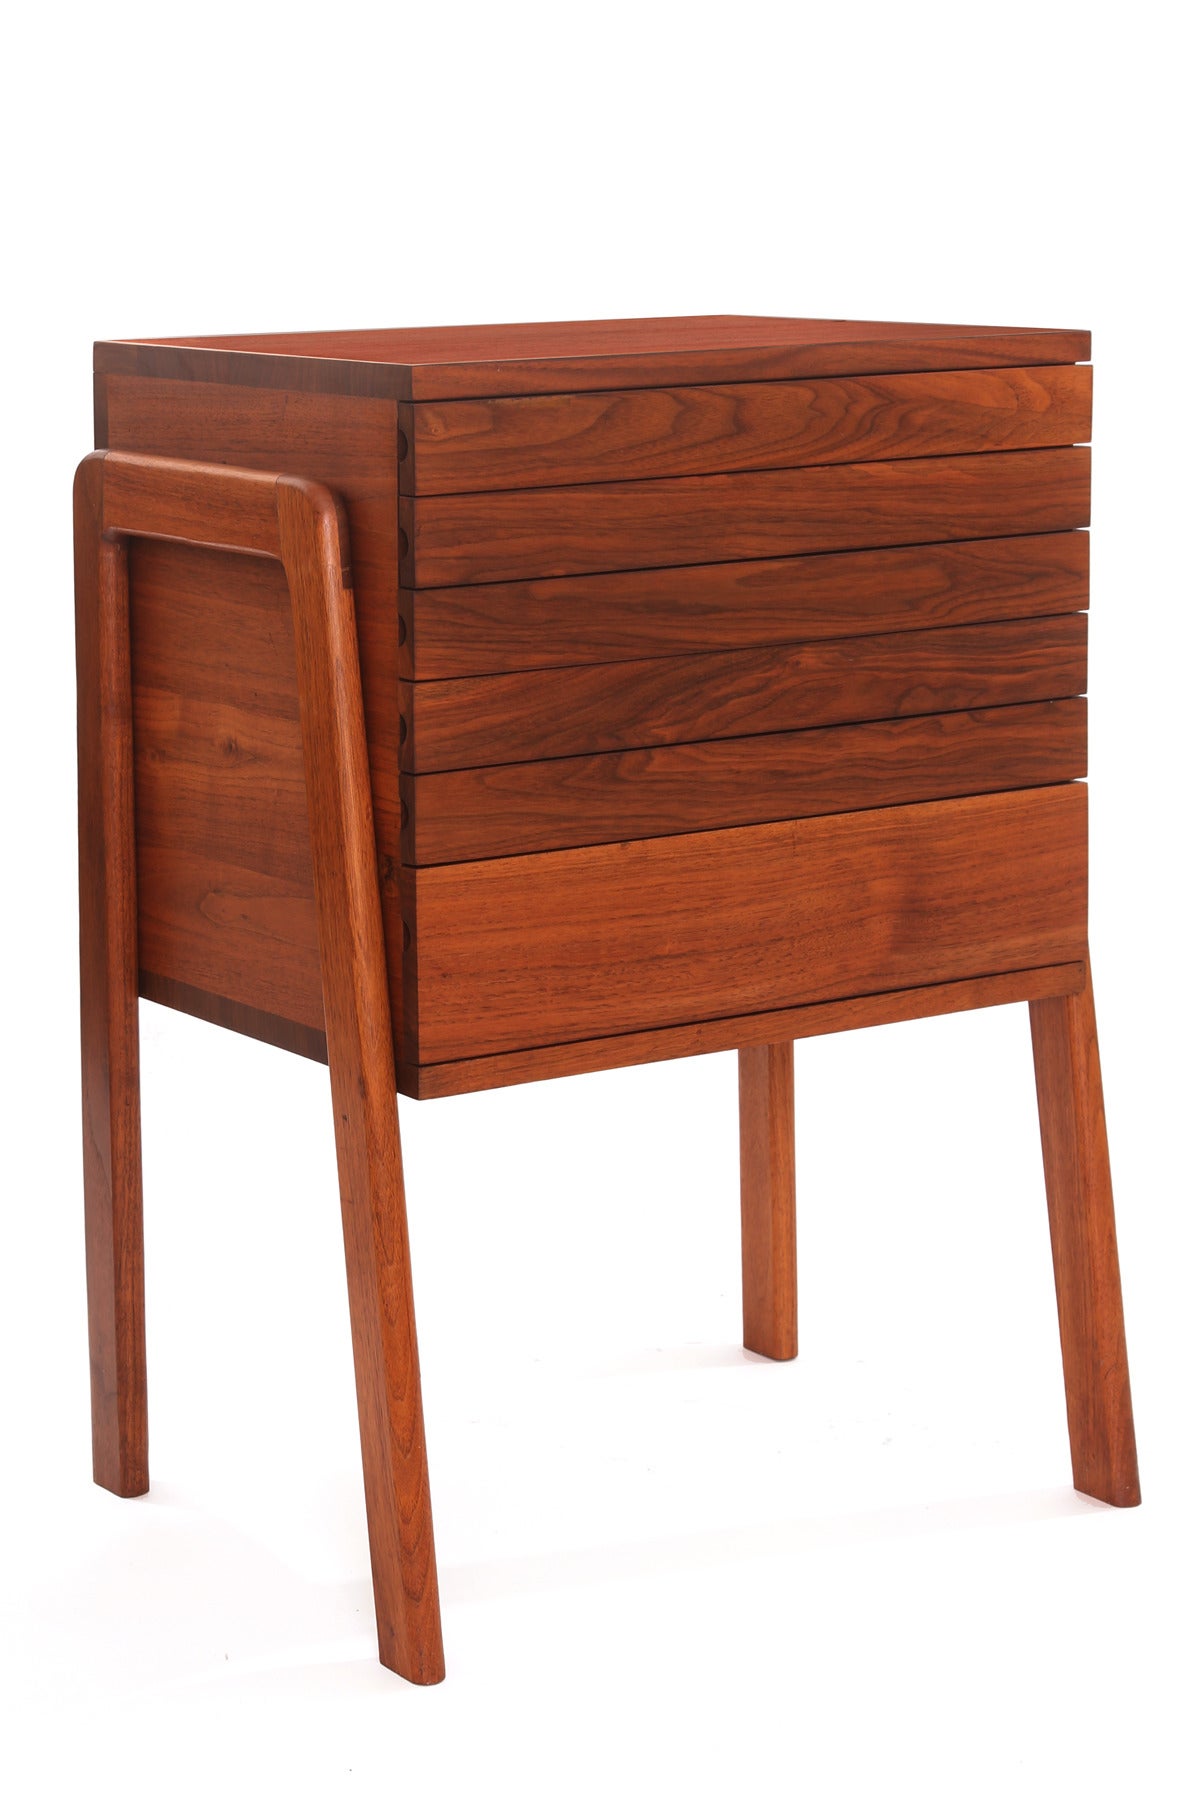 Custom six-drawer walnut jewelry or silverware chest, circa early 1960s. This all original example has six drawers elegant solid walnut side mounted legs and beautifully grained case and drawer fronts.